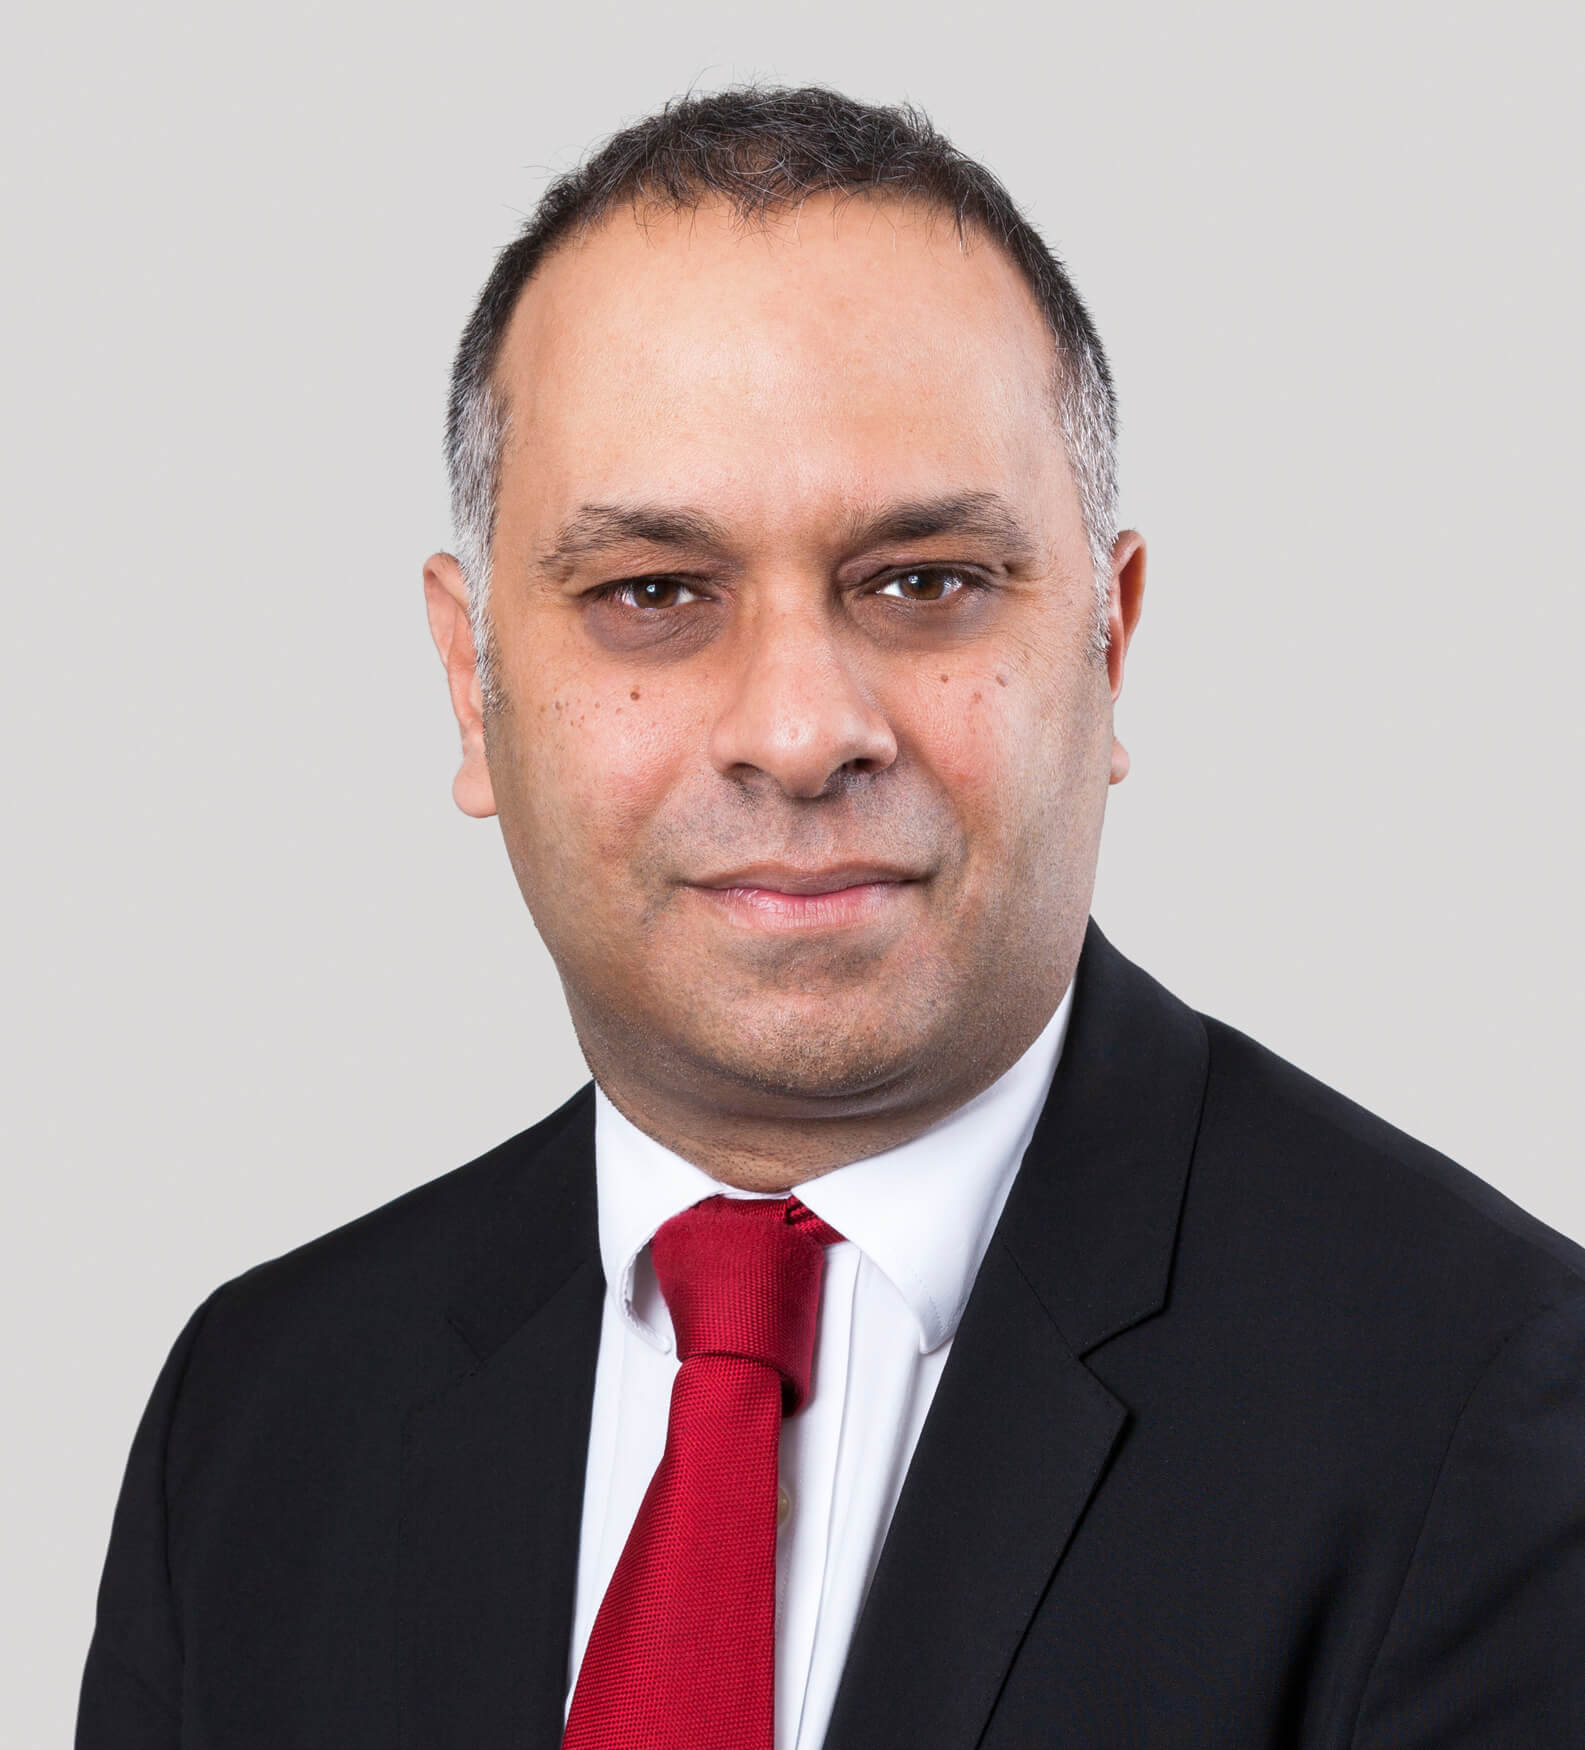 PUBLIC ORDER BILL – Raj Chada, Leading Criminal Defence Solicitor Shares His Views On Proposed Reforms